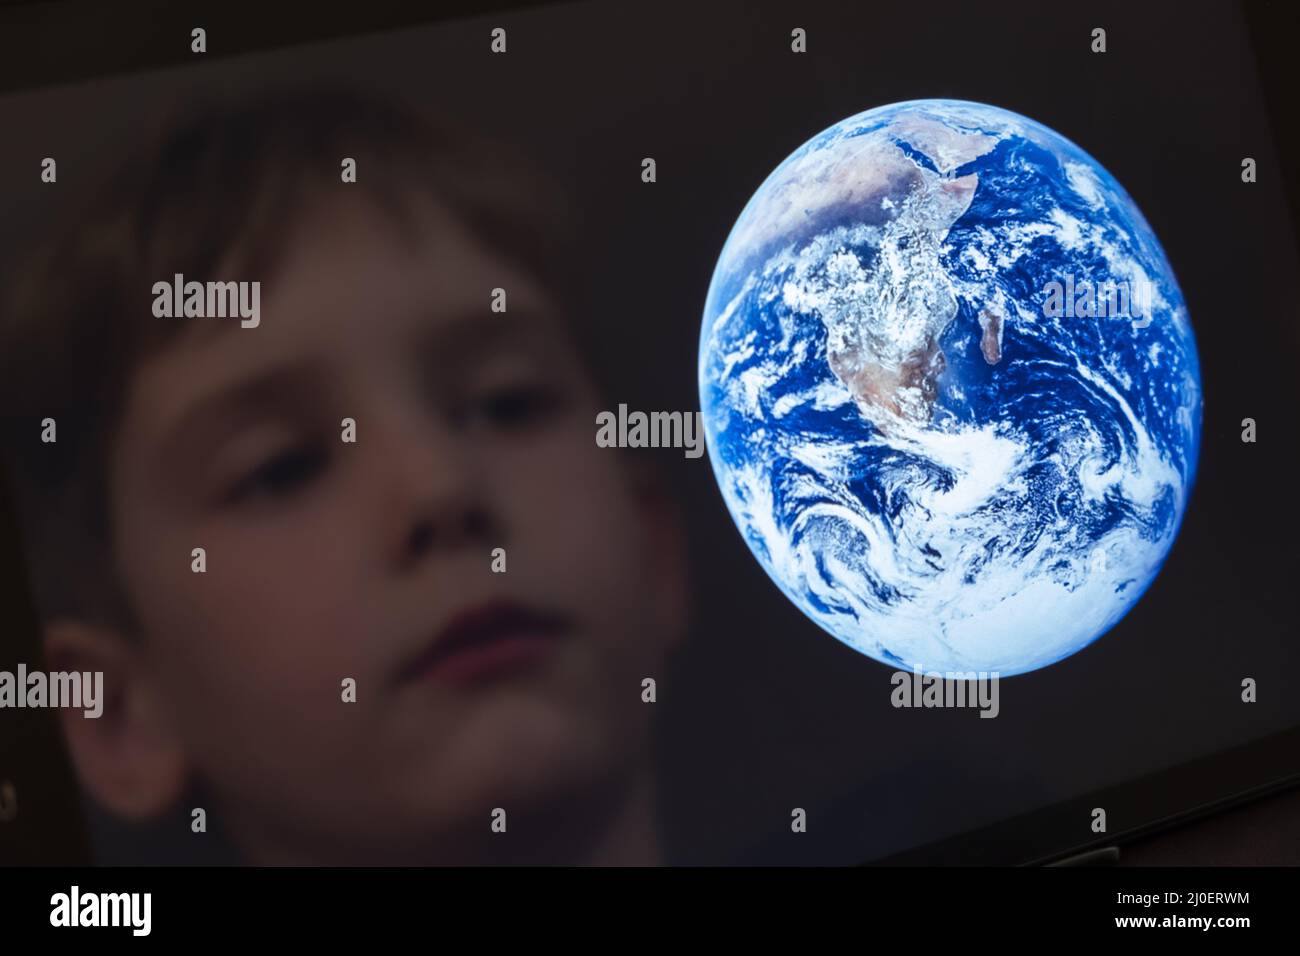 Reflection of a young boy looking at the earth on a tablet computer Stock Photo